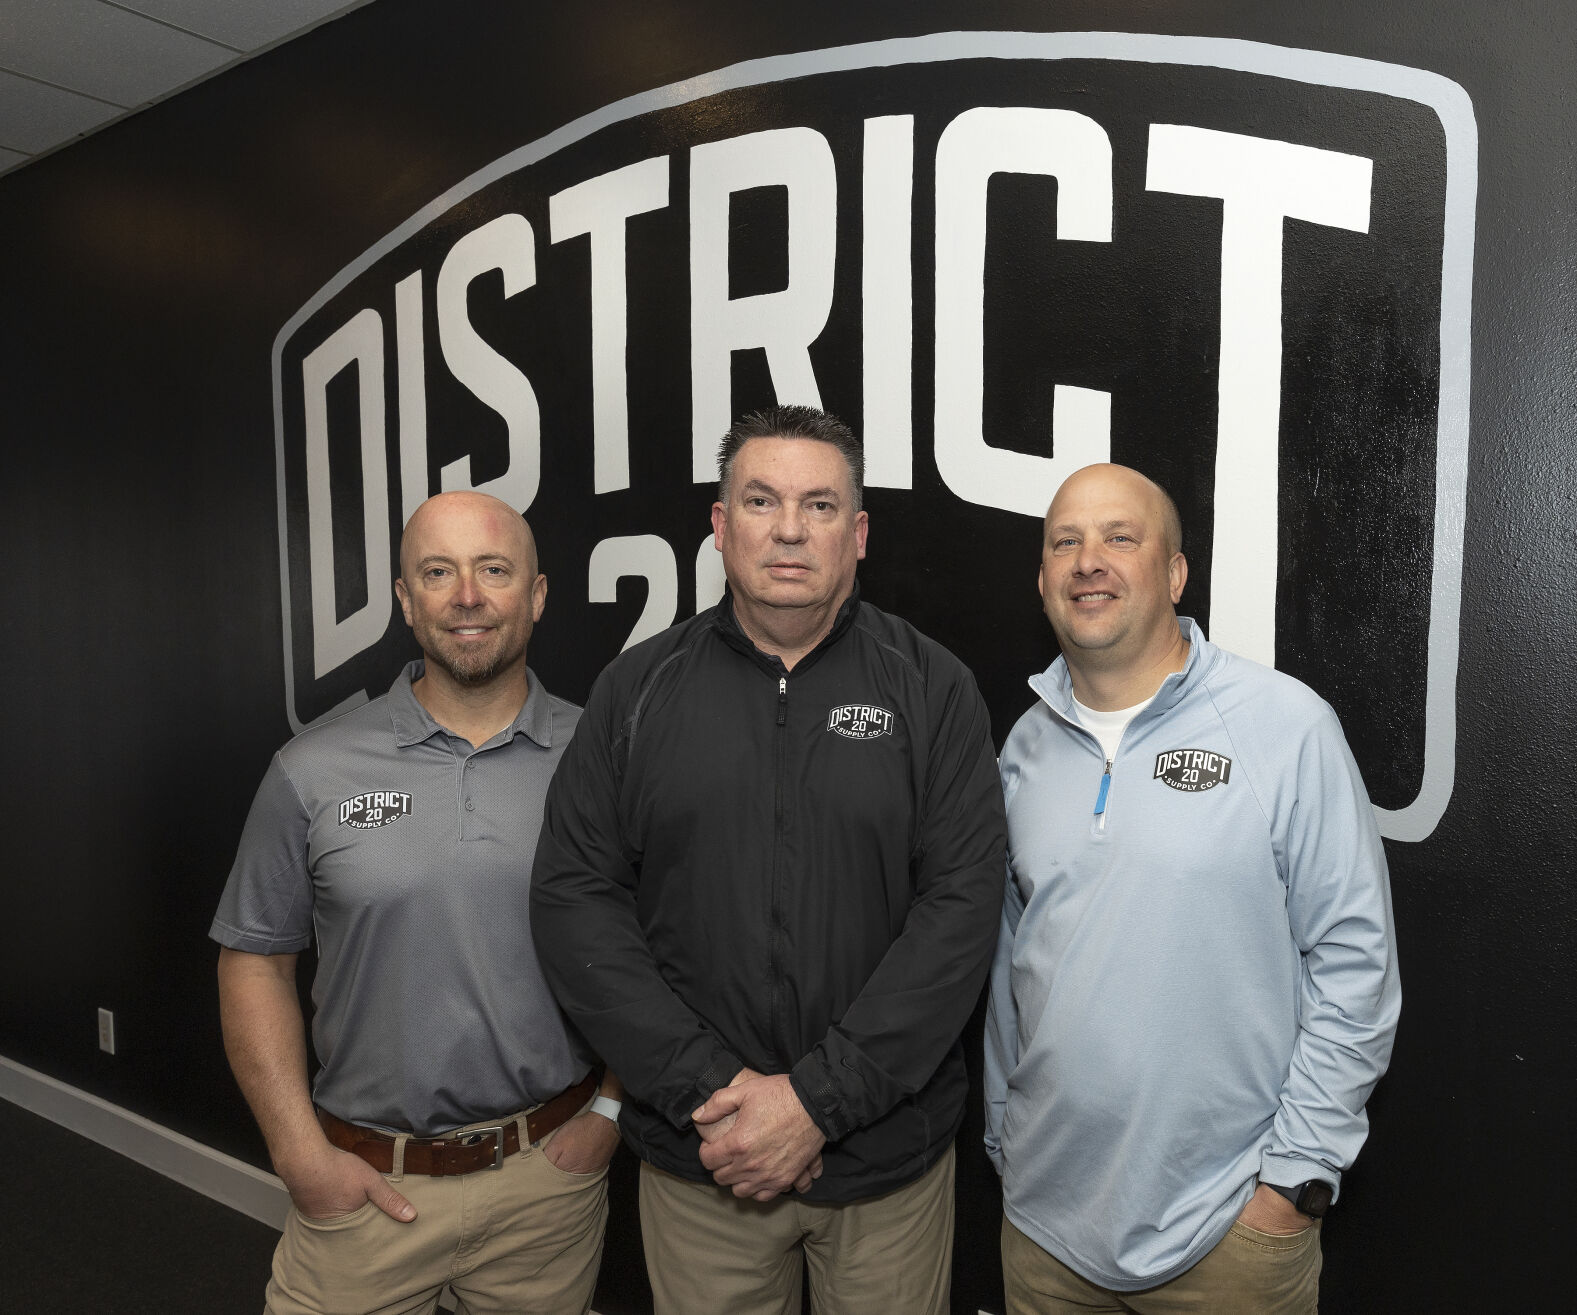 Matt Timmerman, (left) Dennis Noel and Mike Schaul are the owners of District 20 Supply Co.    PHOTO CREDIT: Stephen Gassman